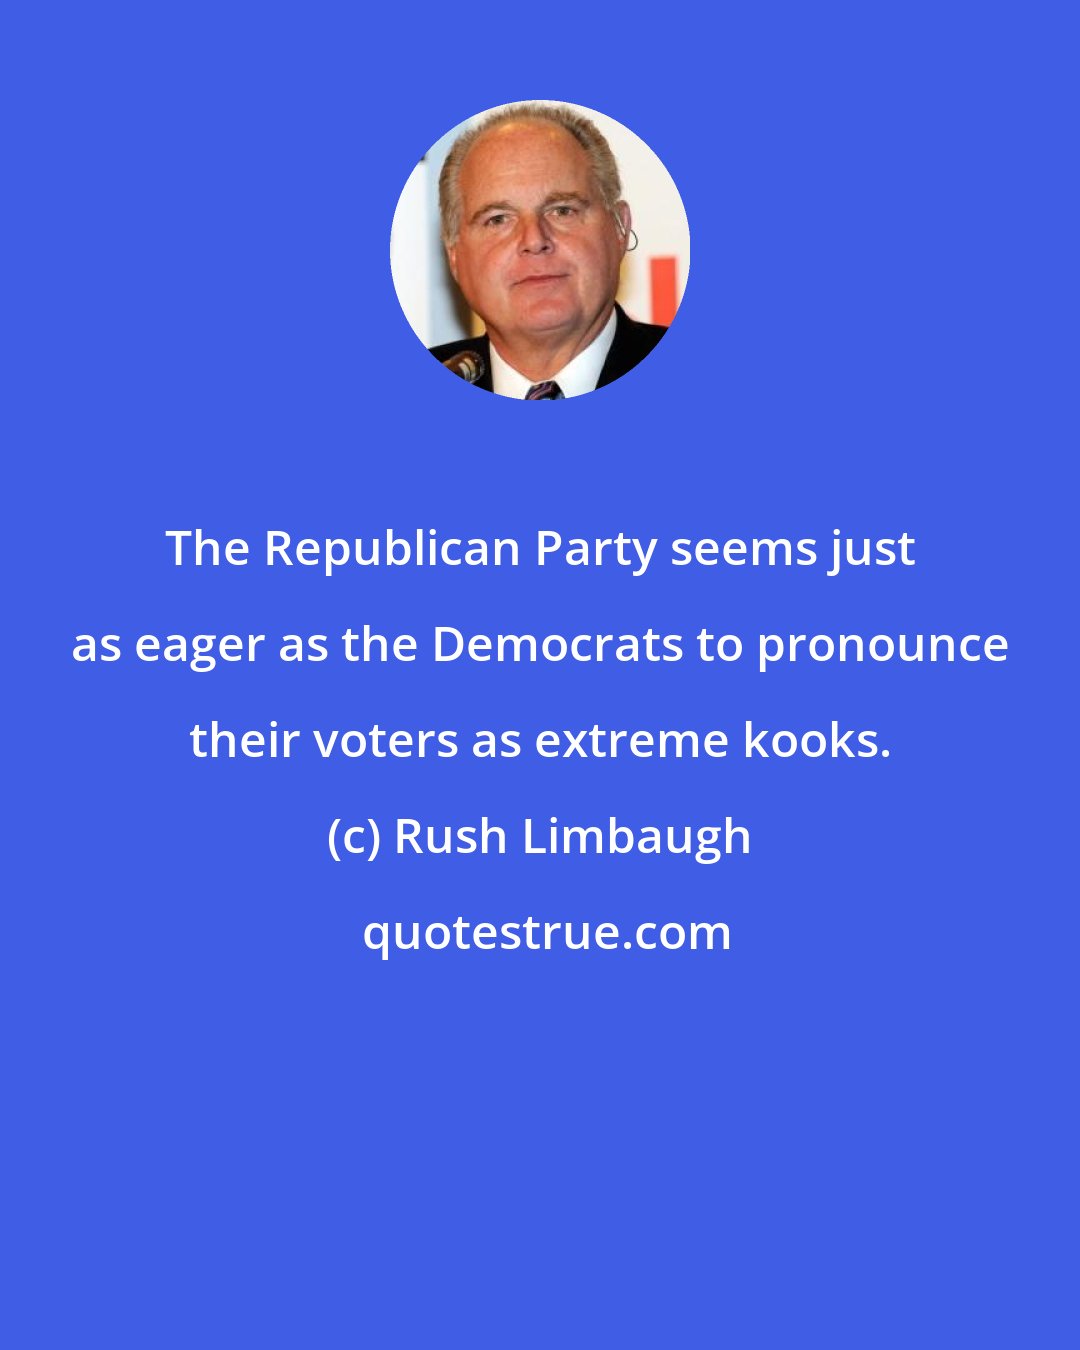 Rush Limbaugh: The Republican Party seems just as eager as the Democrats to pronounce their voters as extreme kooks.